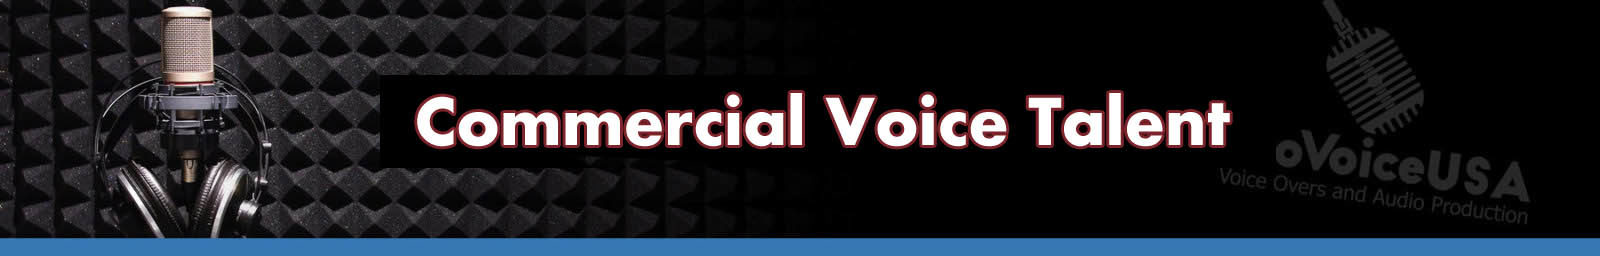 Commercial Voice Talent header